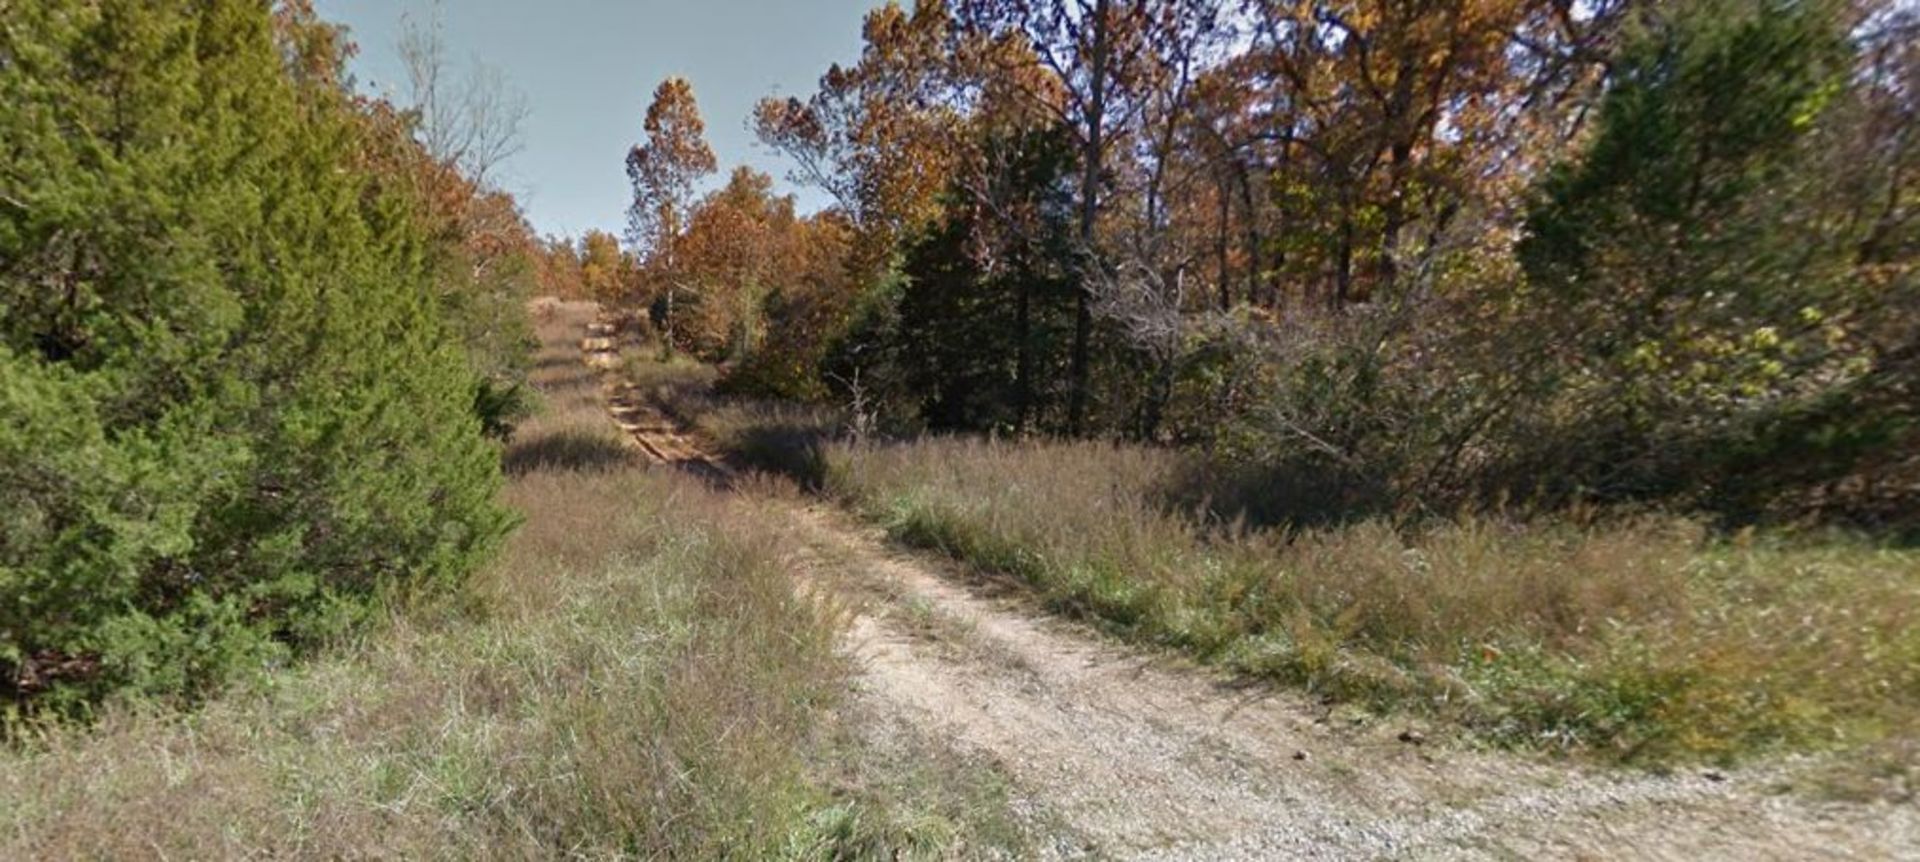 PLOT OF RESIDENTIAL BUILDING LAND, 0.31 ACRES IN HORSESHOE BEND, 72512, ARKANSAS EXECUTIVE ADDITION - Image 4 of 4